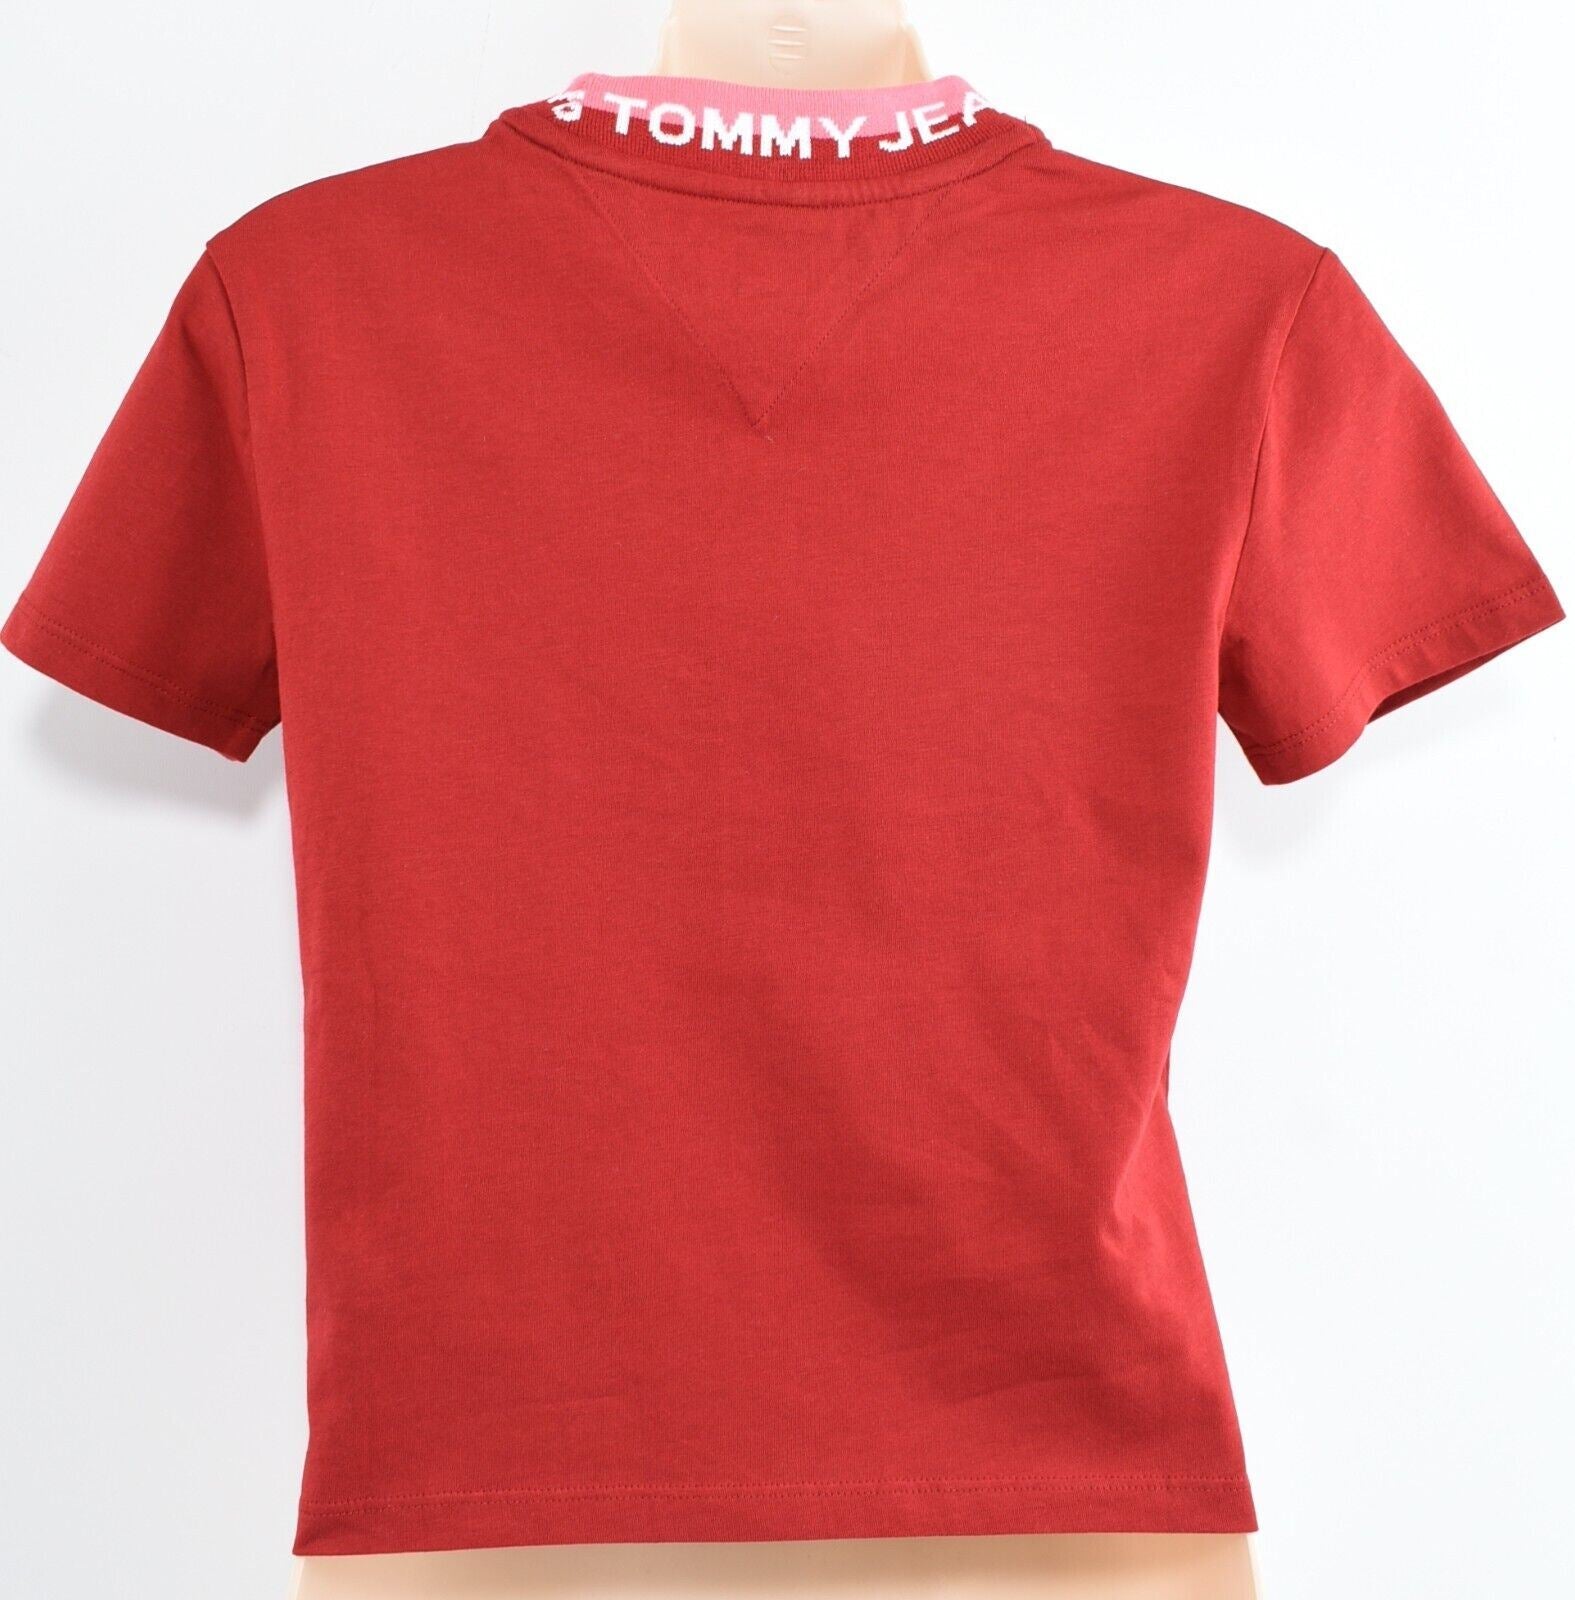 TOMMY HILFIGER Women's Logo Neck Cropped T-shirt, Wine Red, size S /UK 10